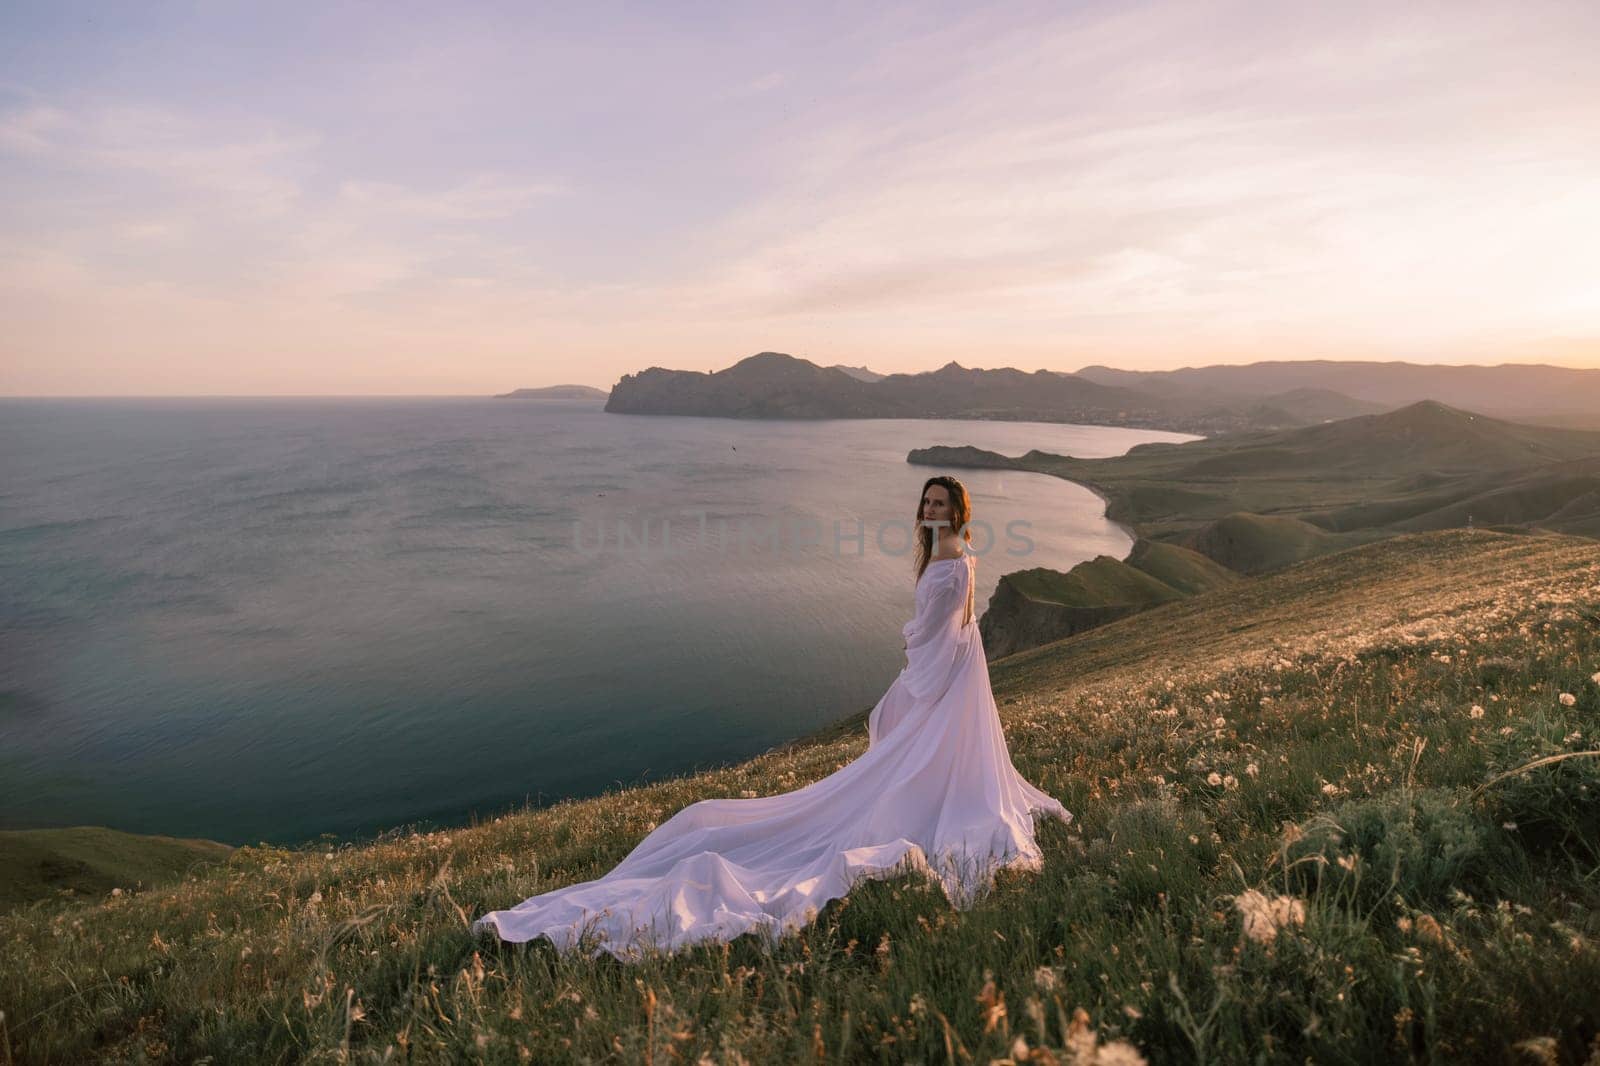 A woman in a white dress stands on a grassy hill overlooking the ocean. The scene is serene and peaceful, with the woman's dress flowing in the wind